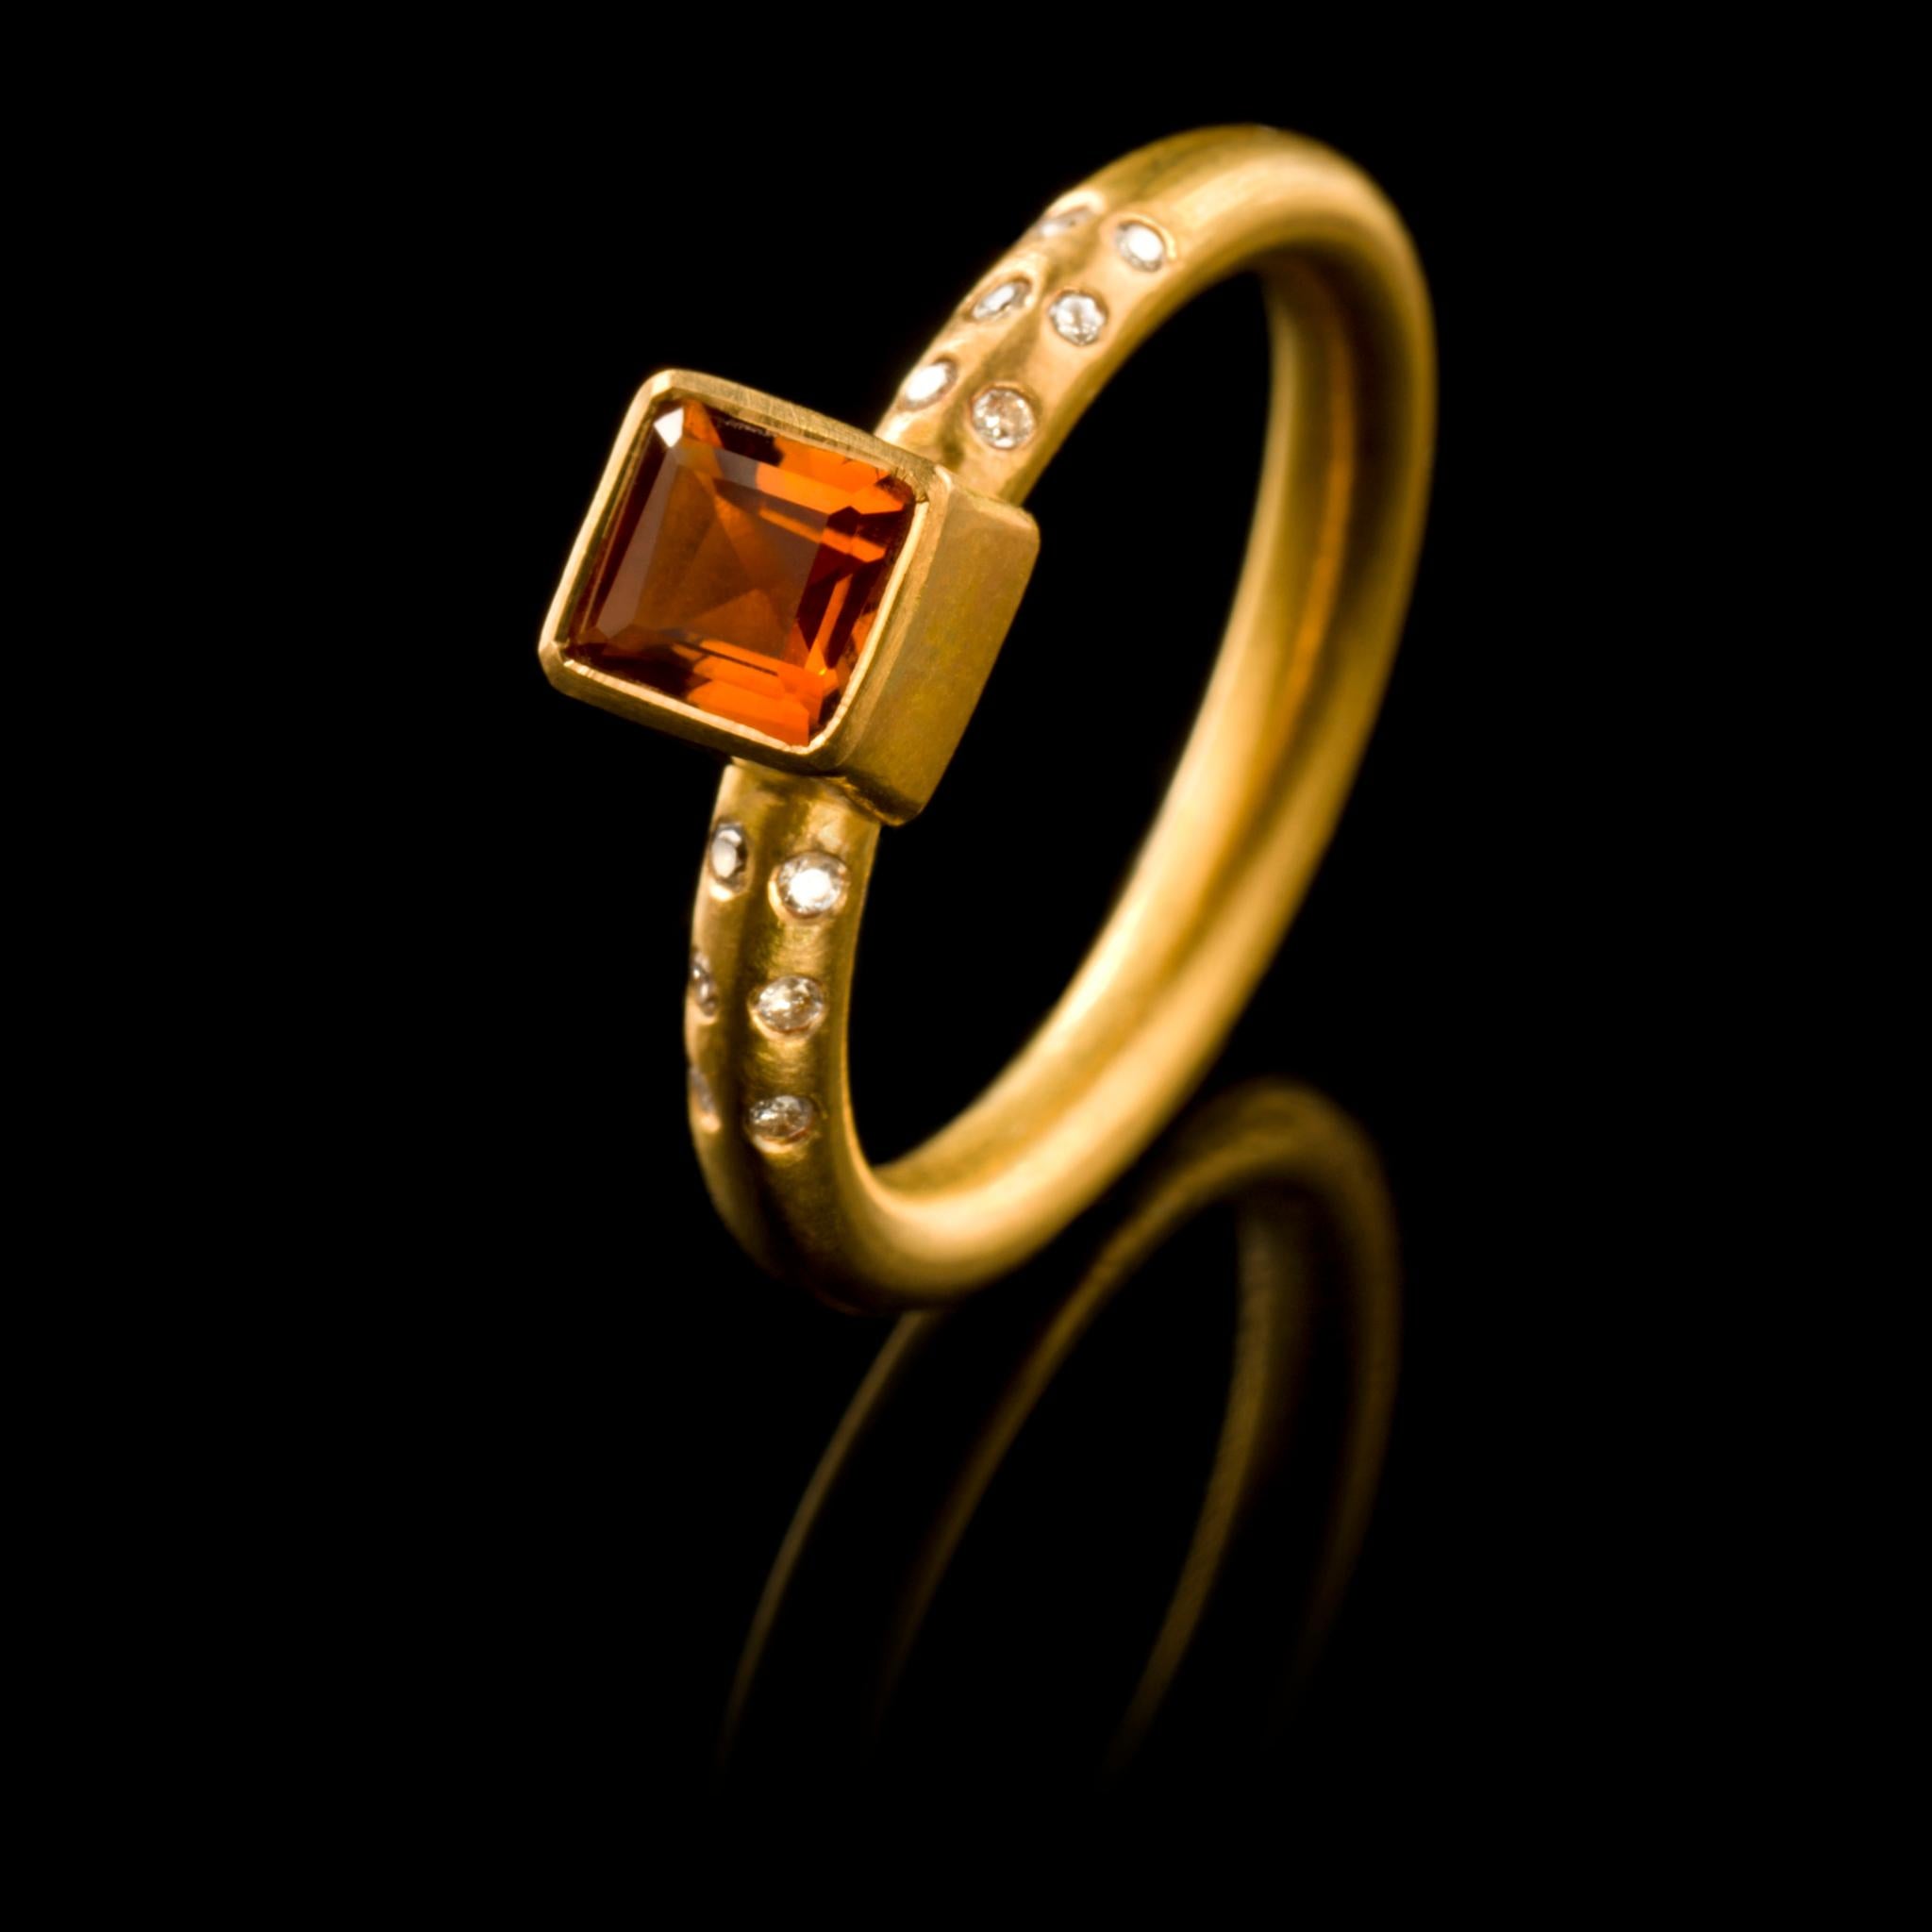 A chic, hand crafted 18 karat matte gold stacking ring with a square cut citrine flanked by six diamonds either side. Size: UK O/P US 7.5 EUROPE 55.5 The ring can be resized. Wear it on its own or with other rings from the collection as shown on our